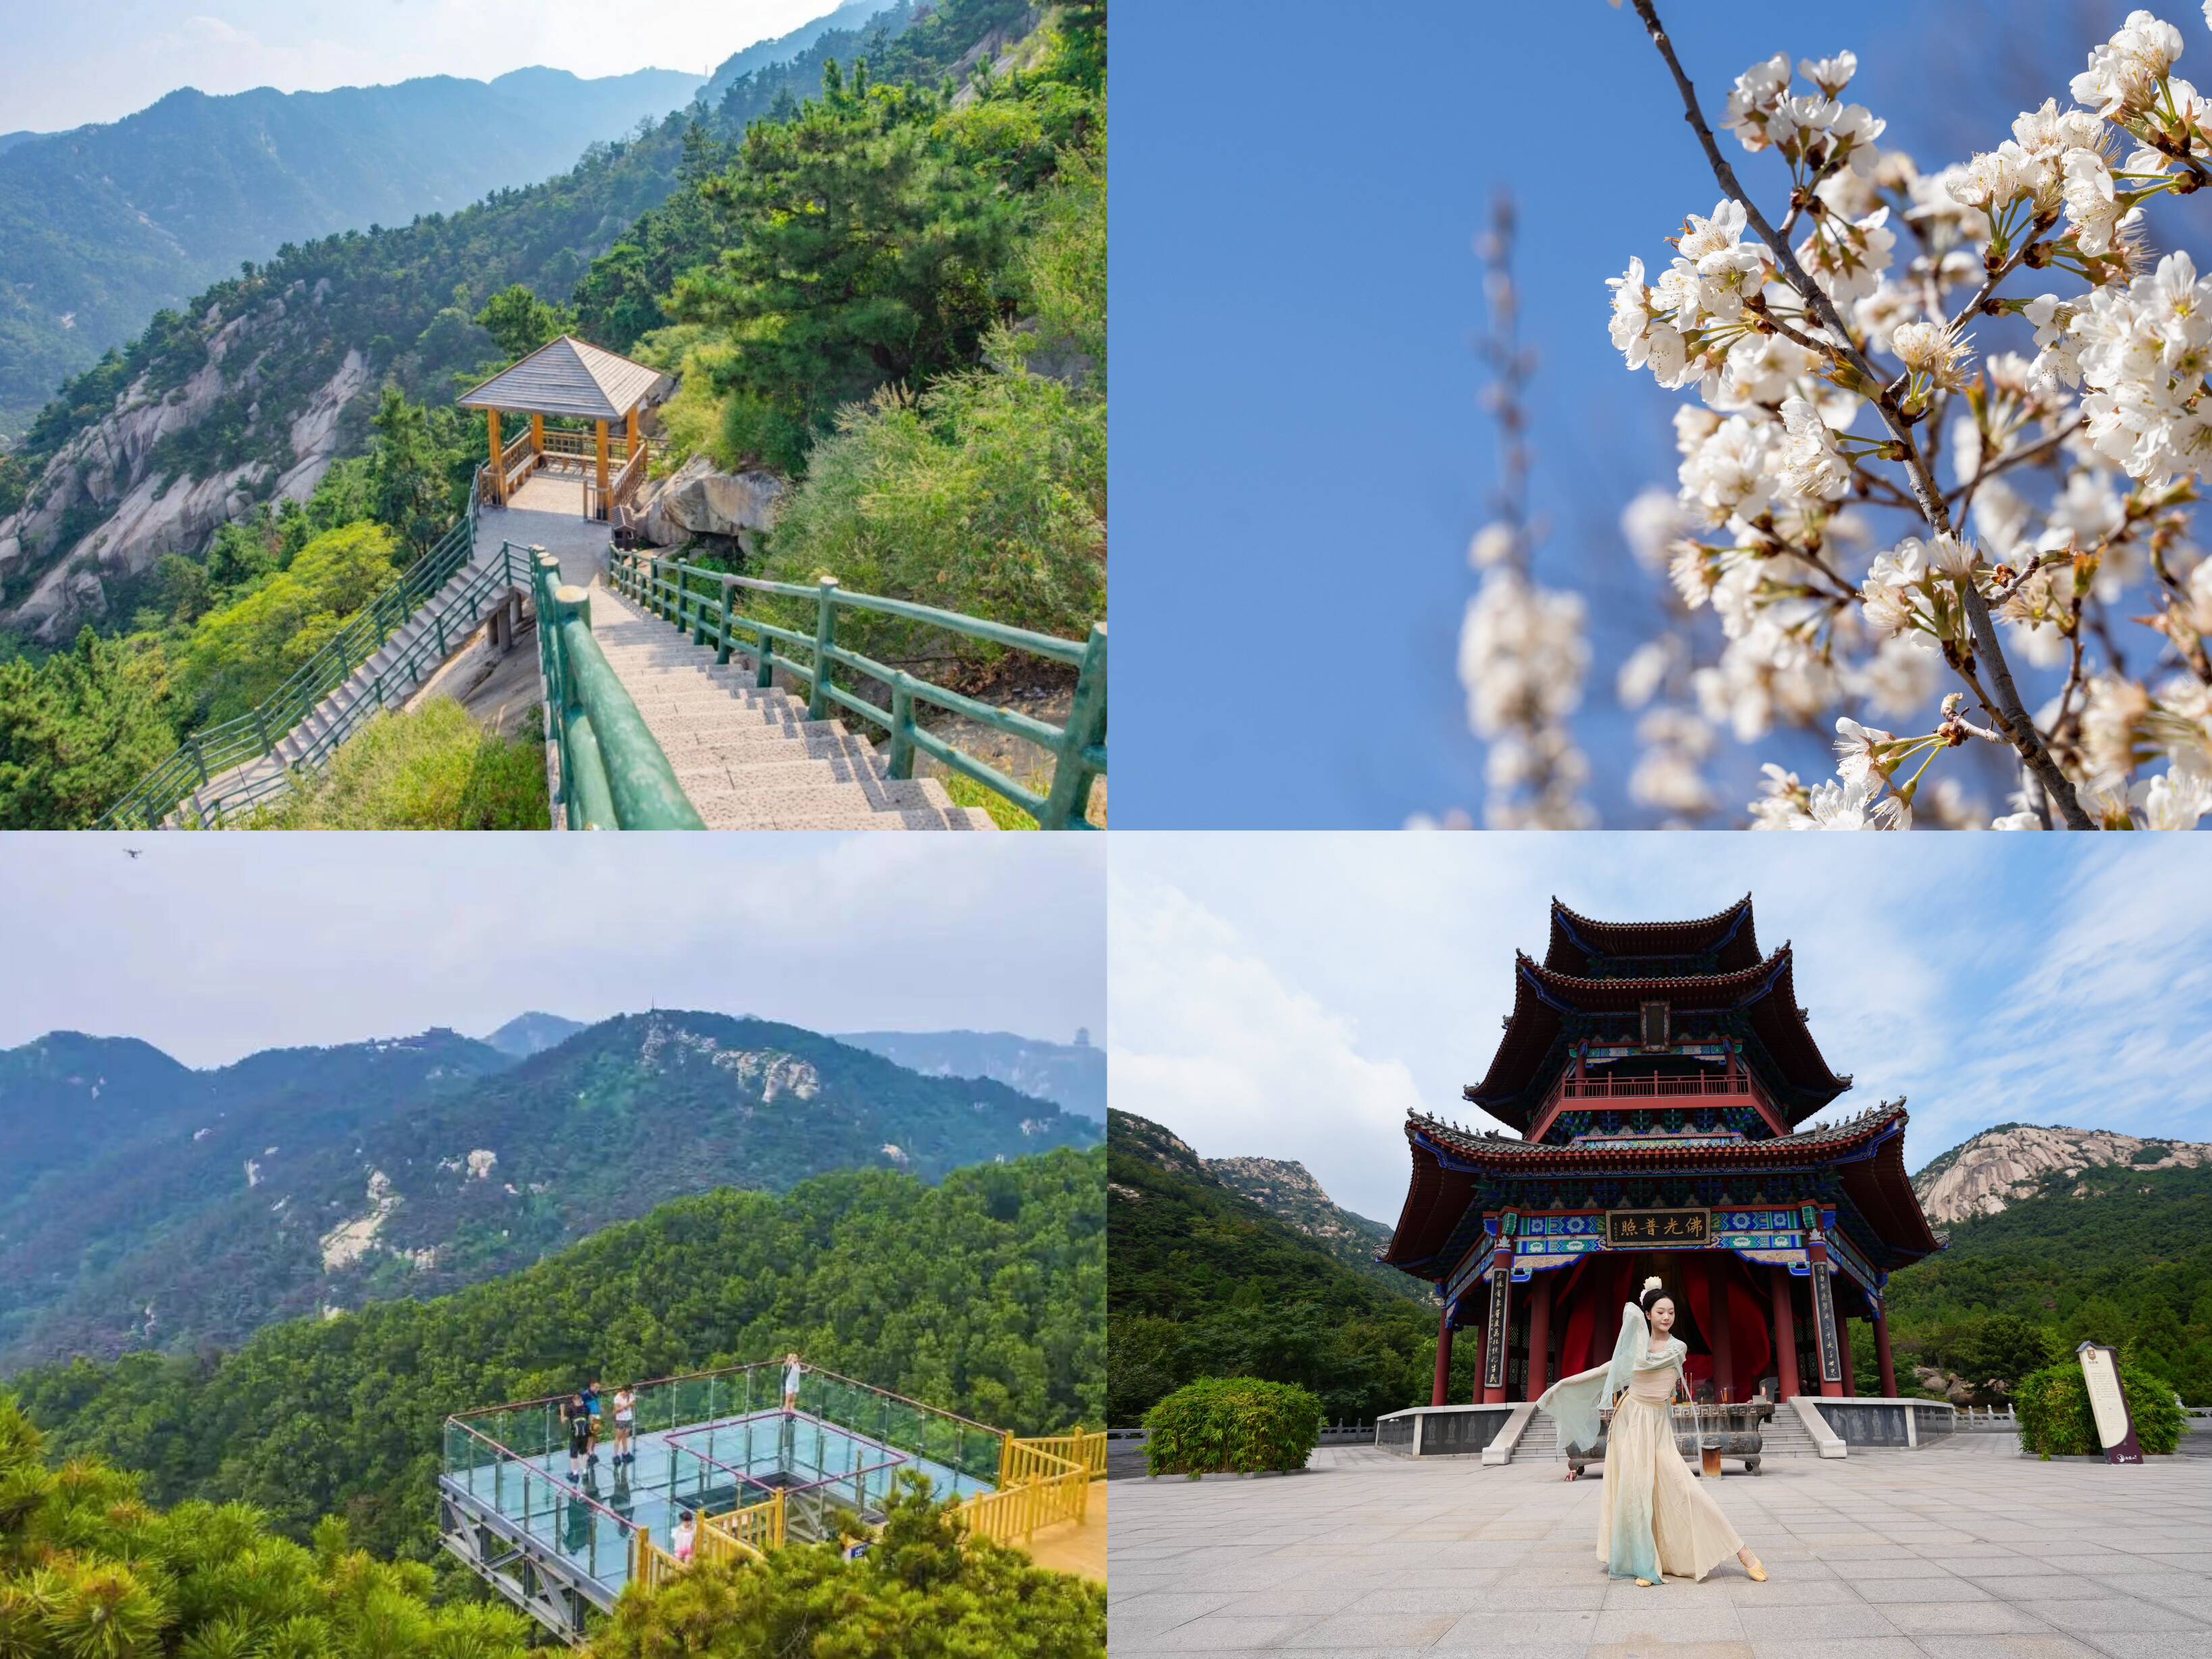  Flash News Joins Hands with Shandong Cultural Tourism Scenic Spot to Invite Students from All over the Country to "Spring Mountain" for Free